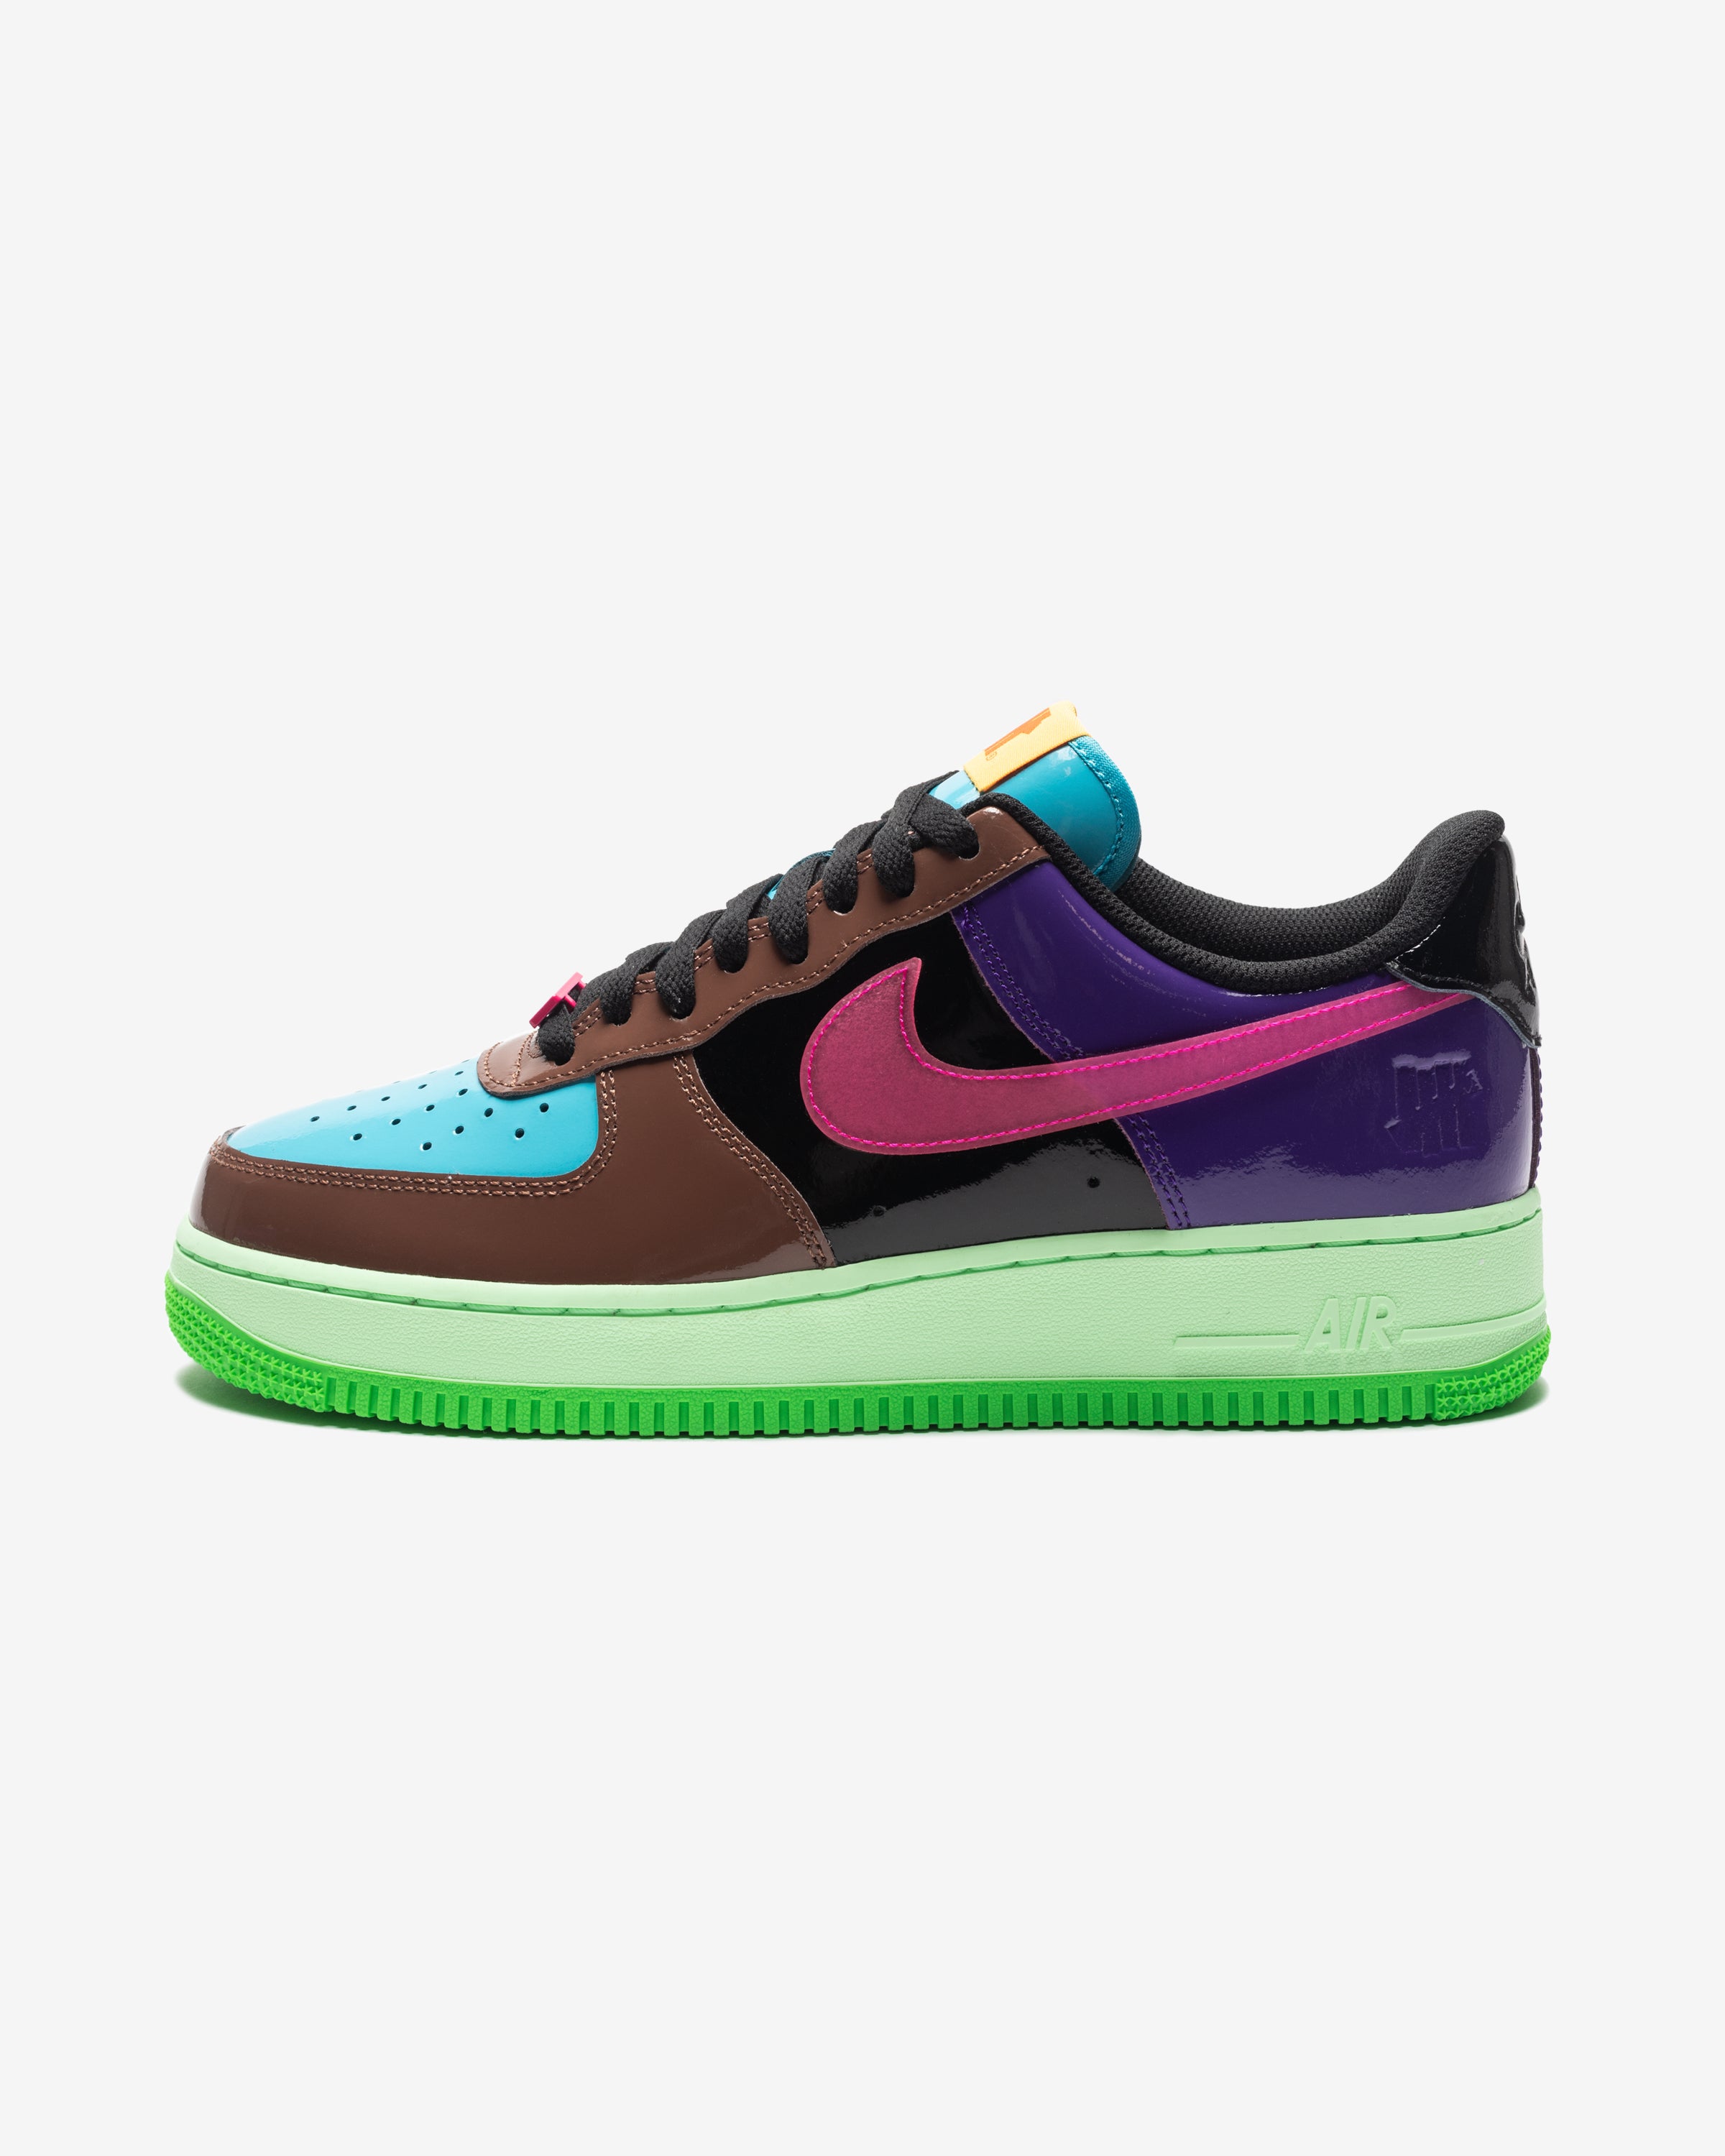 UNDEFEATED X NIKE AIR FORCE 1 LOW SP - FAUNABROWN/ PINK/ MULTI